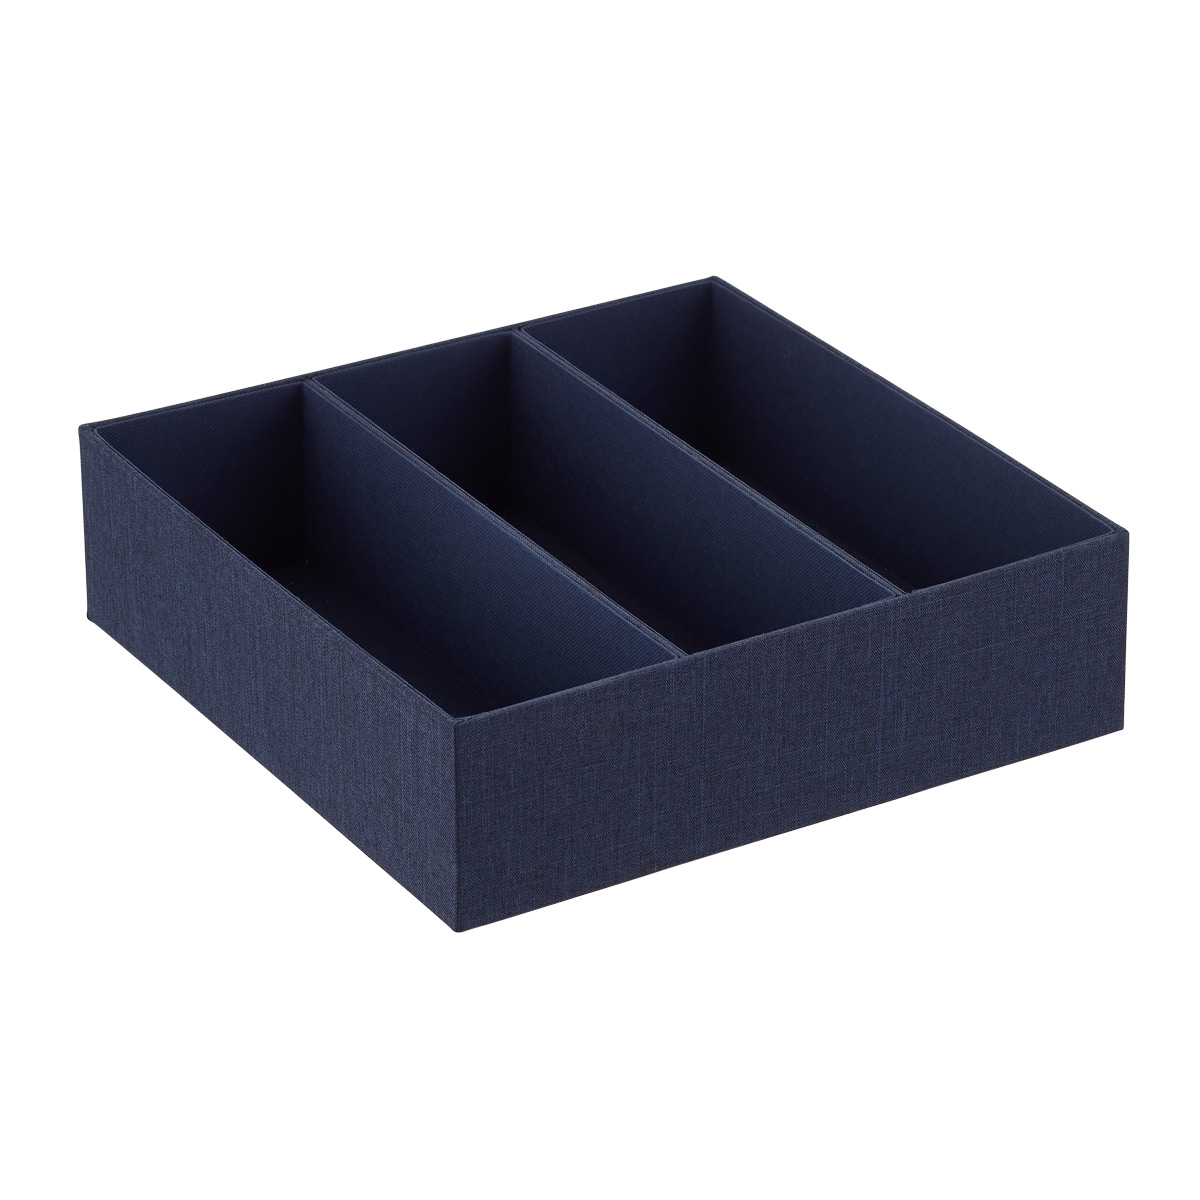 Medium Drawer Organizer Tray Teal, 10-3/8 x 3-1/2 x 1-3/4 H | The Container Store